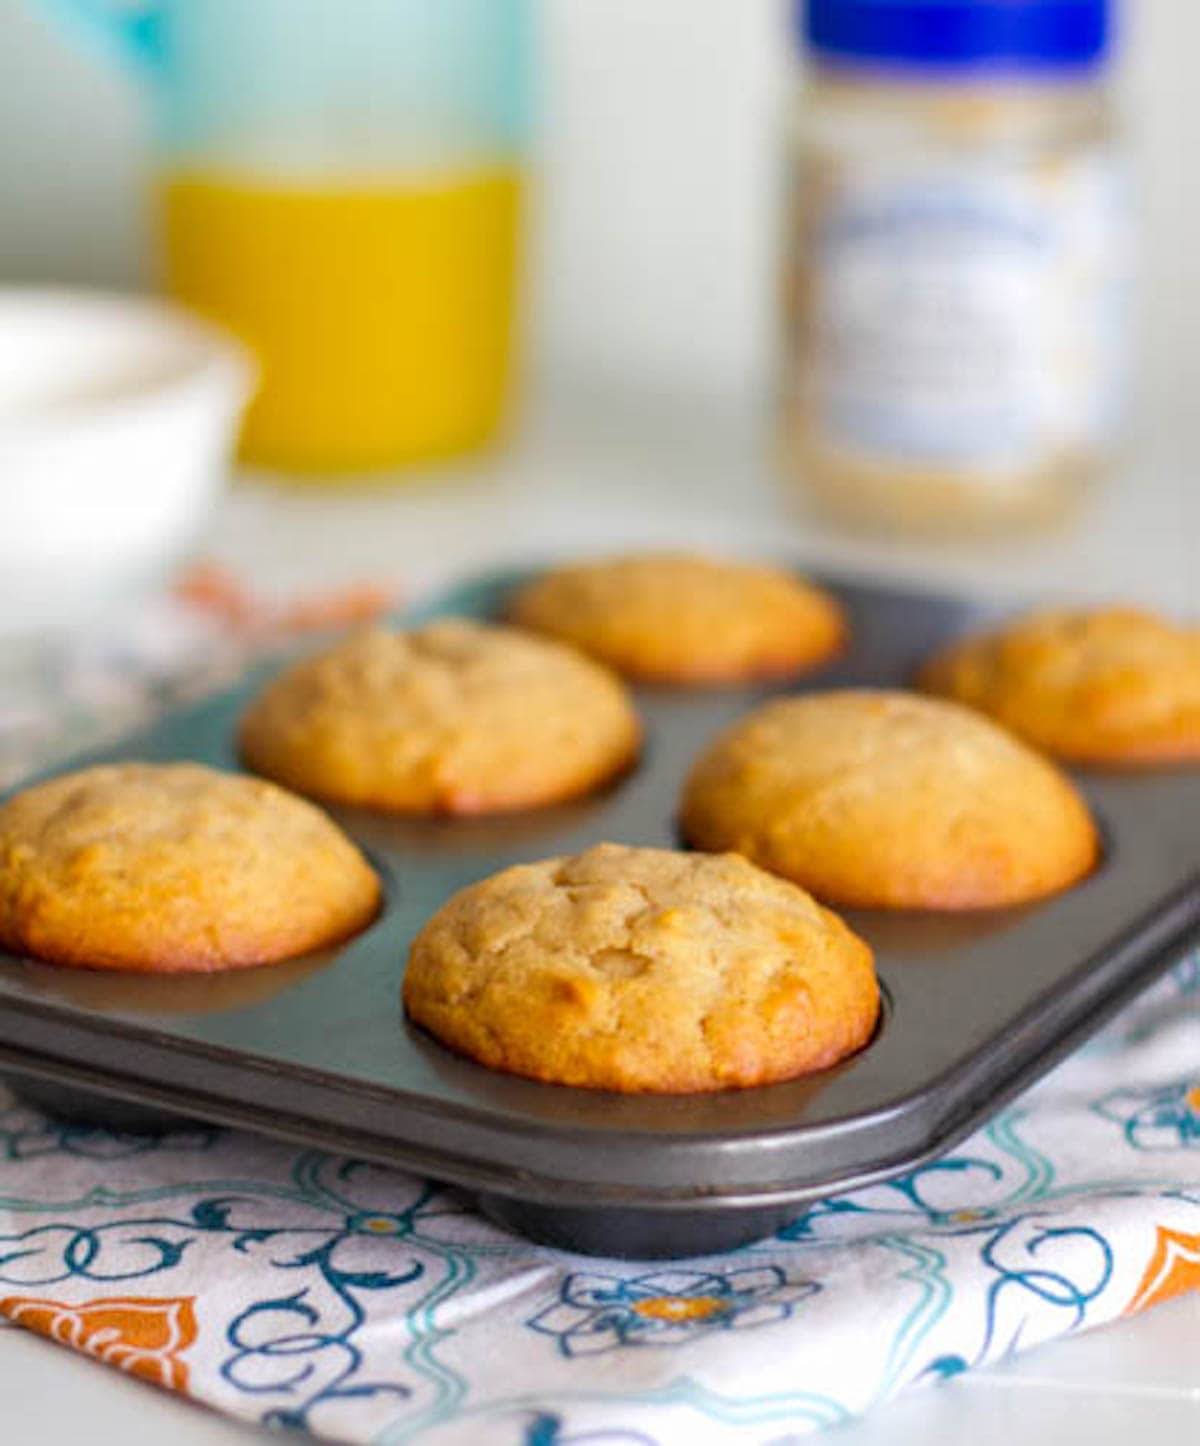 Peanut butter and honey muffins in a baking tin.